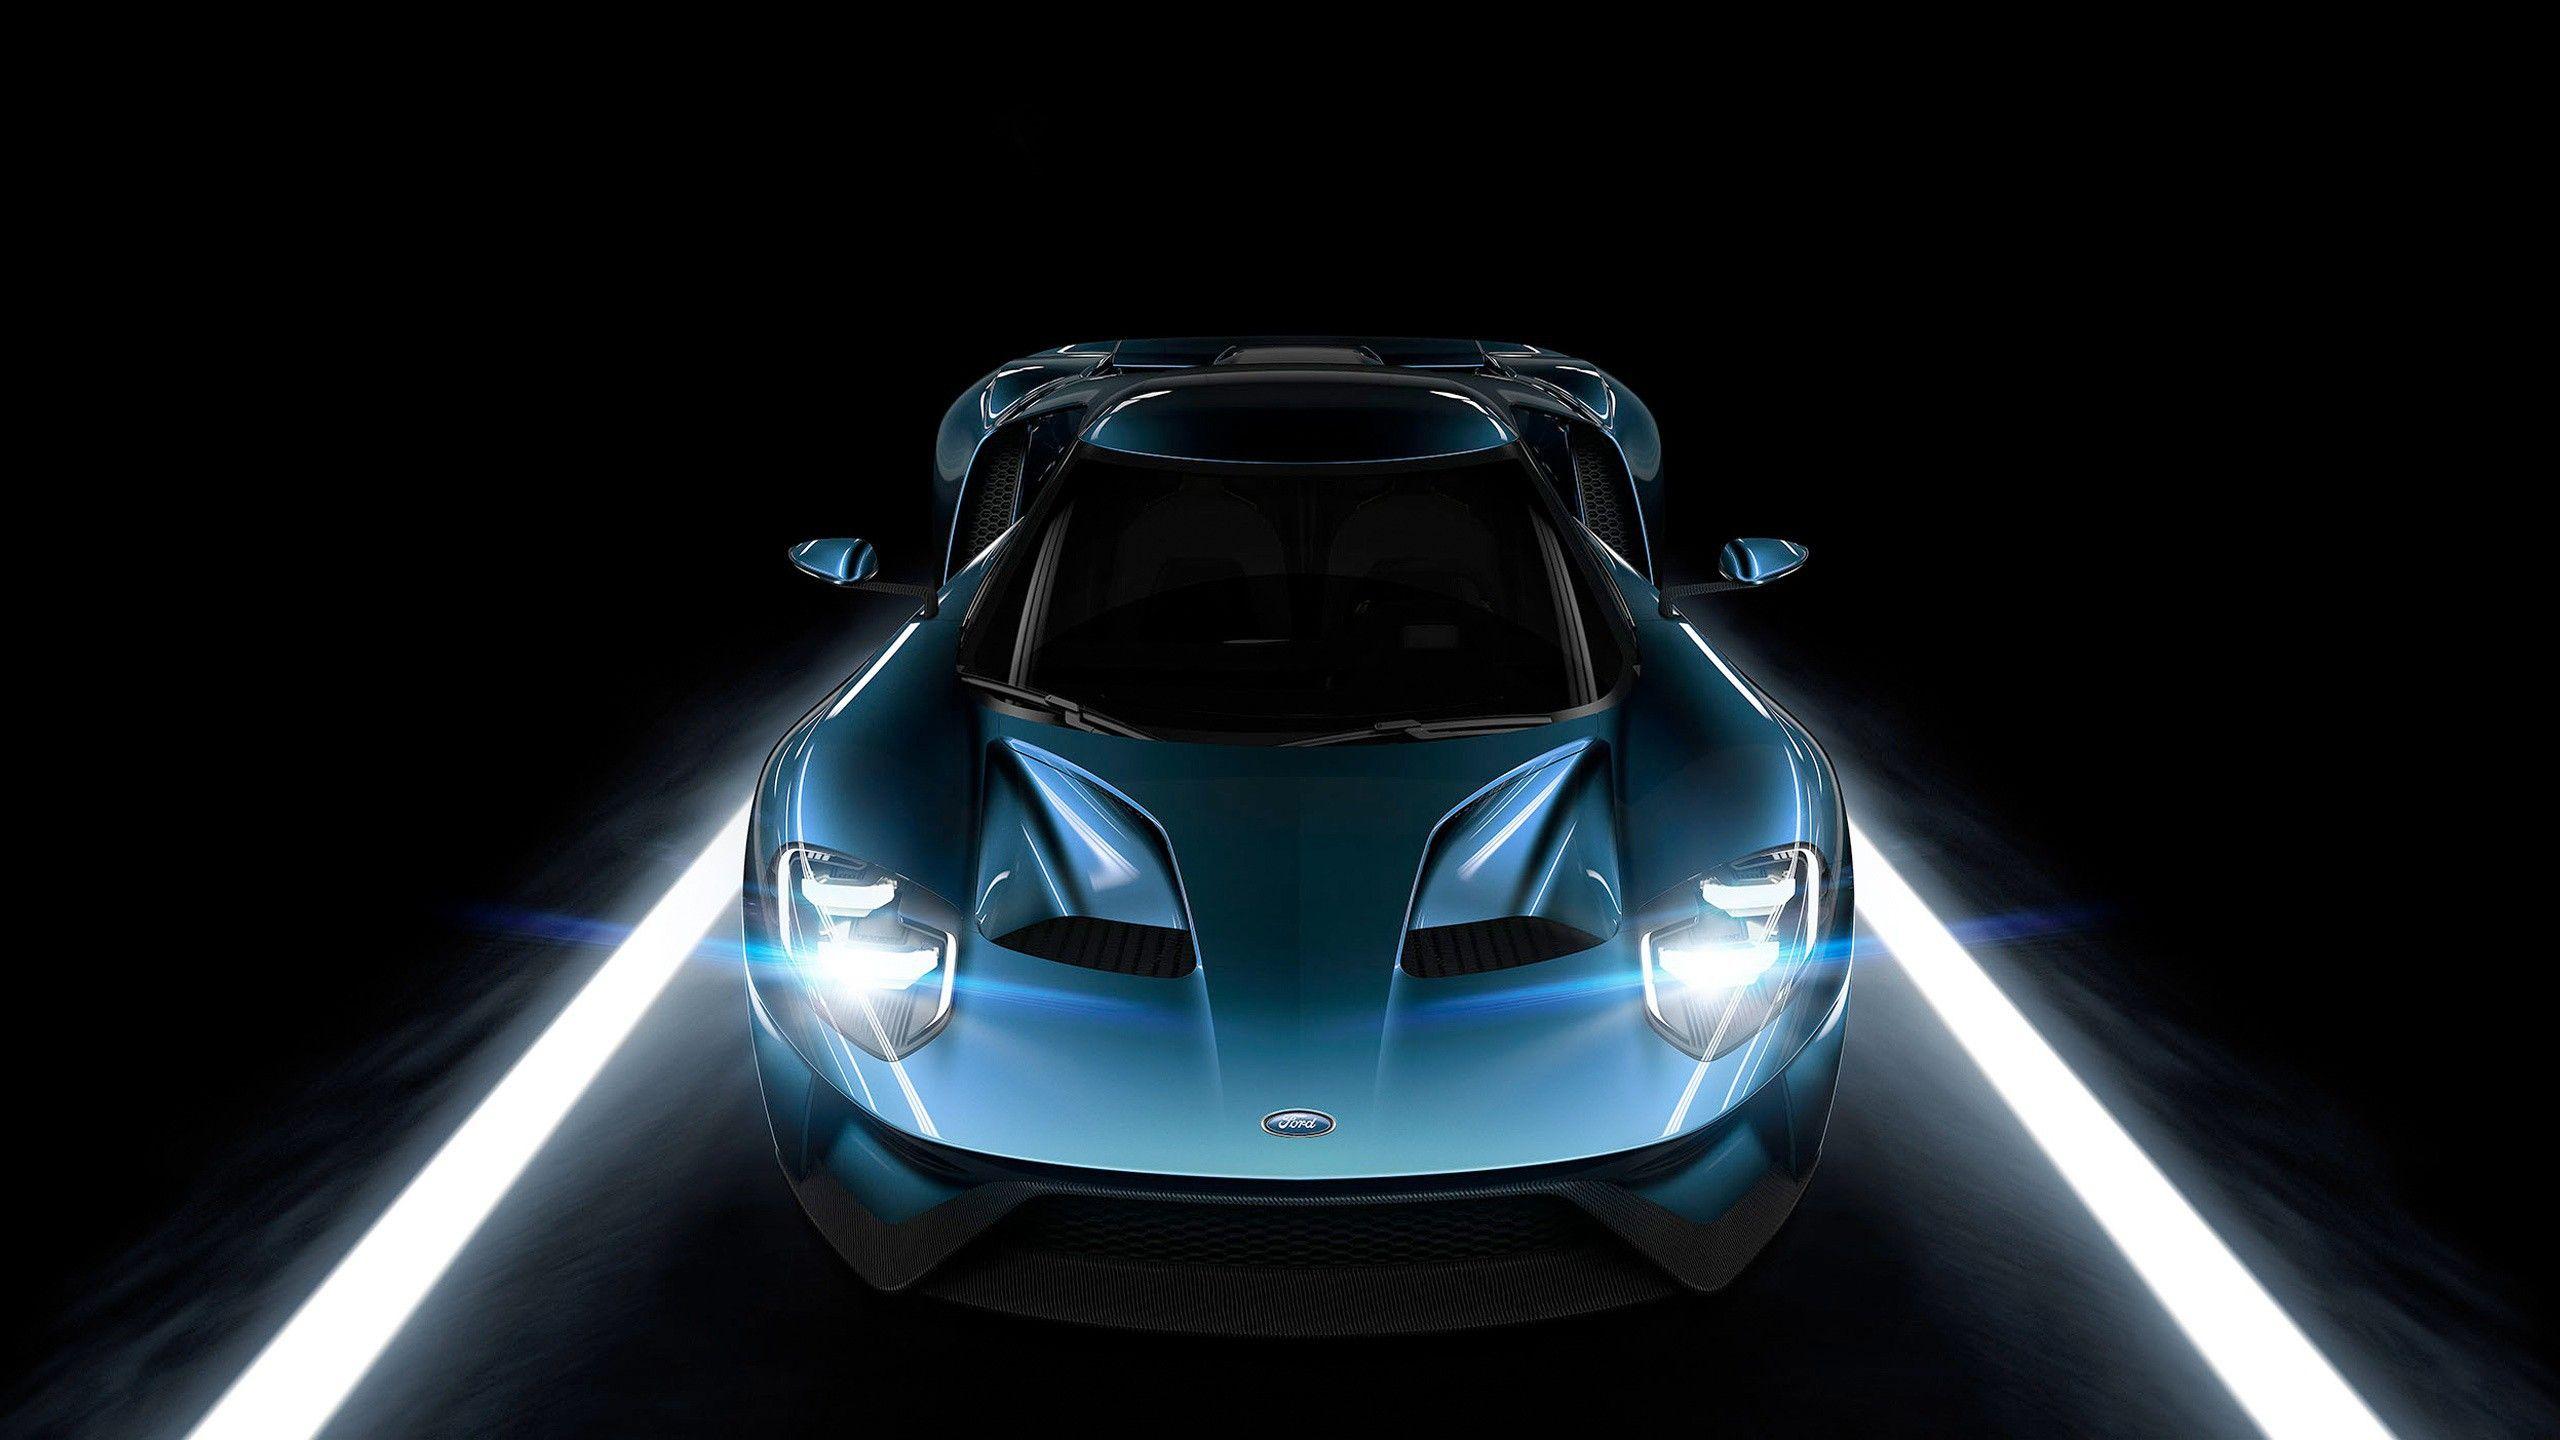 Neon car Ford GT 2015 wallpaper and image, picture